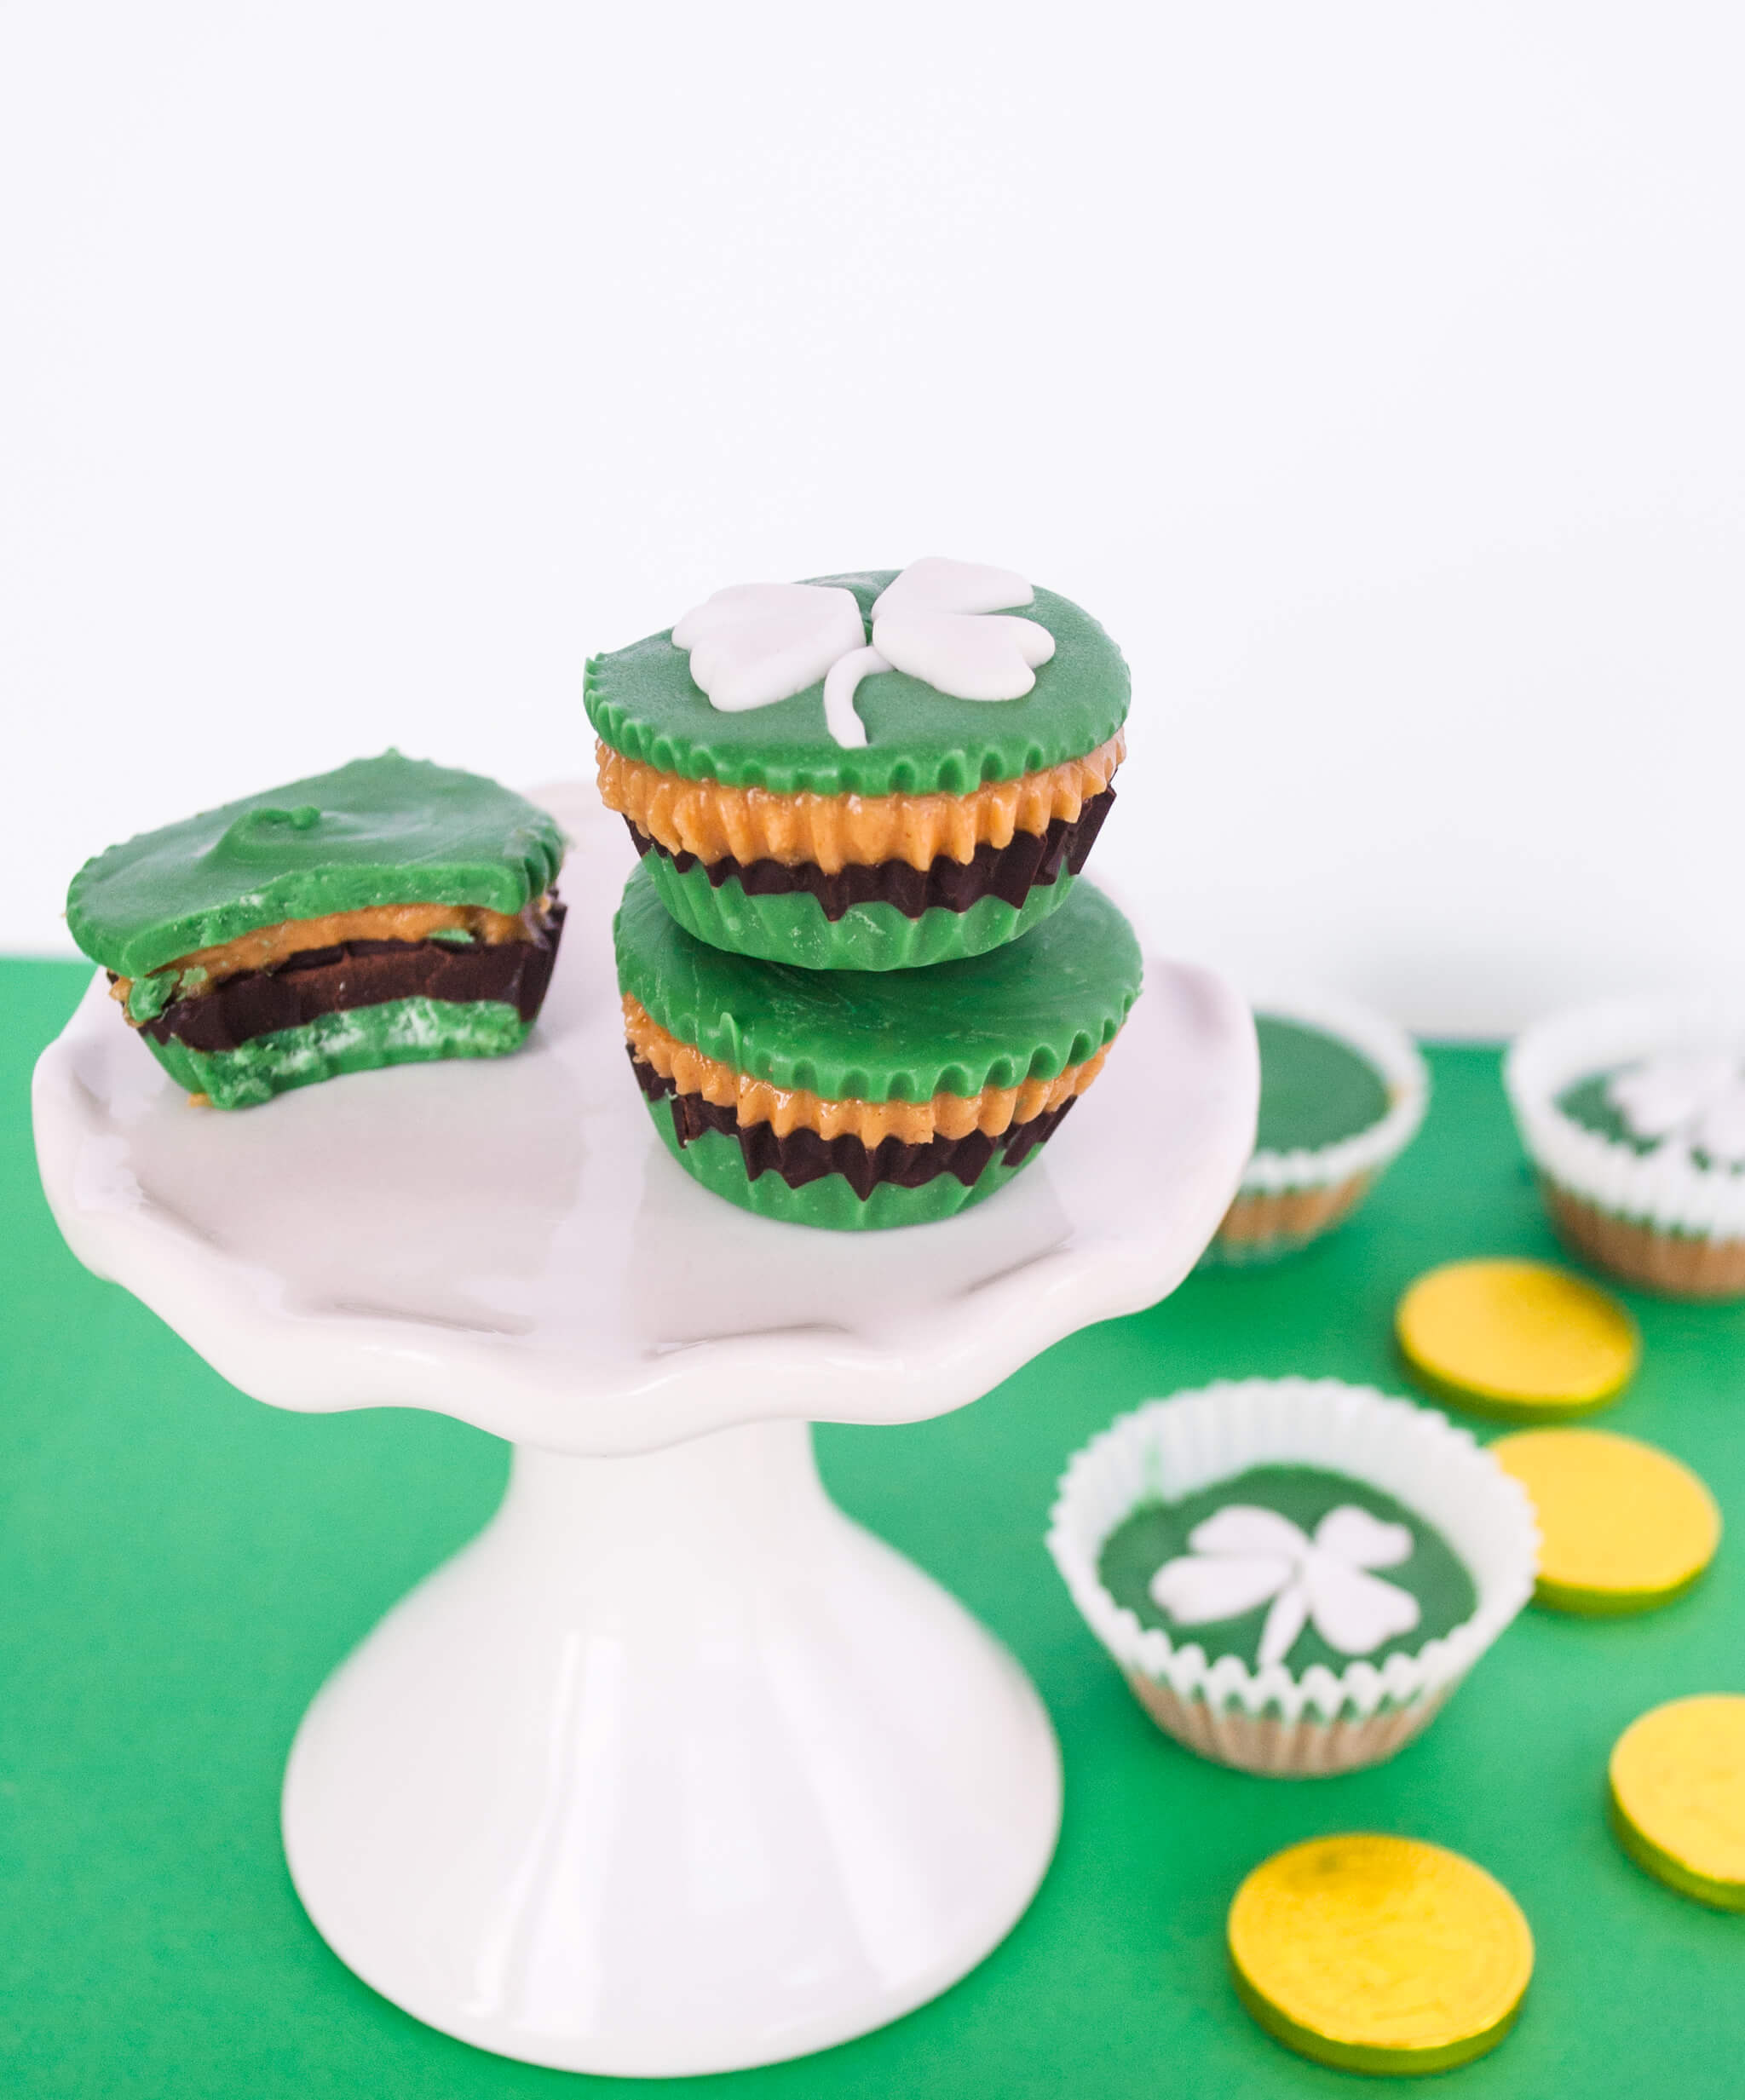 St. Patrick's Day Chocolate Peanut Butter Cups Recipe. Make these lucky green chocolate peanut butter cups for your little leprechauns - it only takes 5 ingredients and 30 minutes plus fridge cooling time.